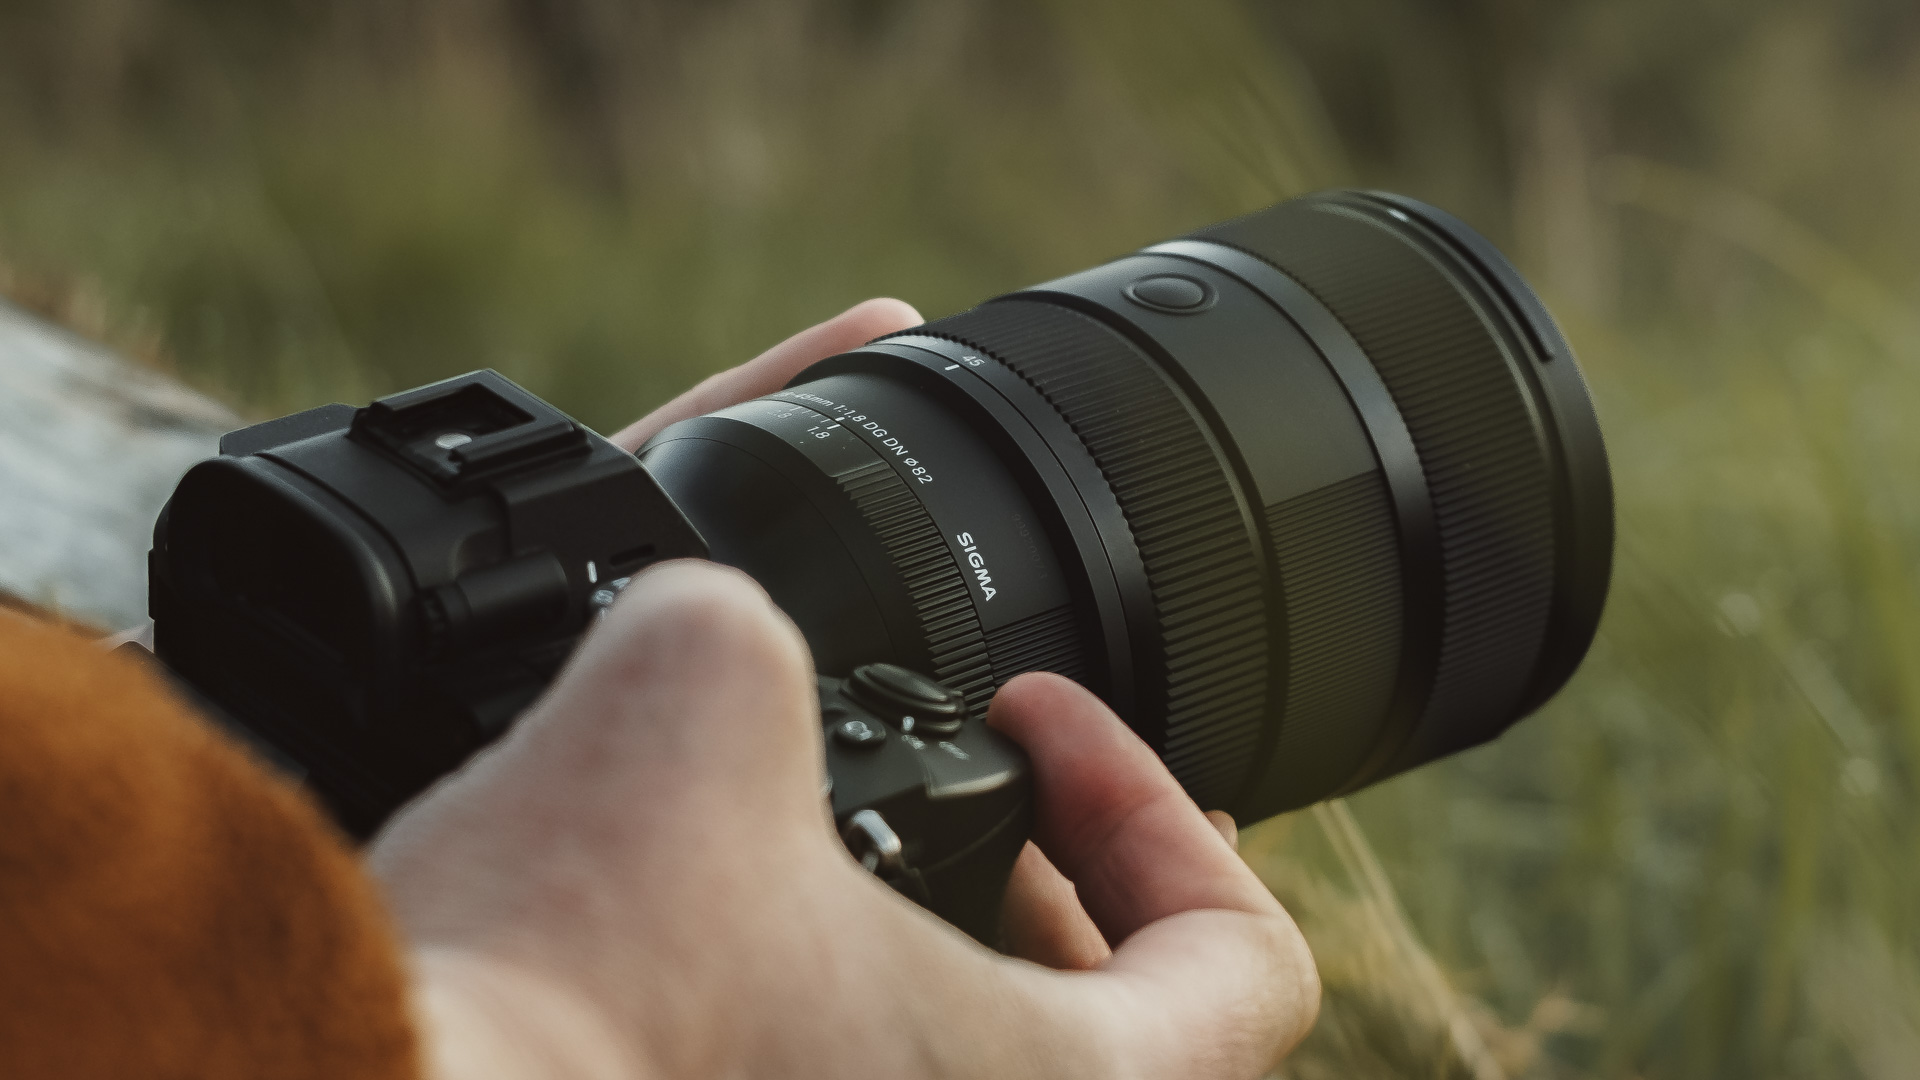 Sigma 28-45mm F1.8 lens mounted on a Sony camera being held by a photographer